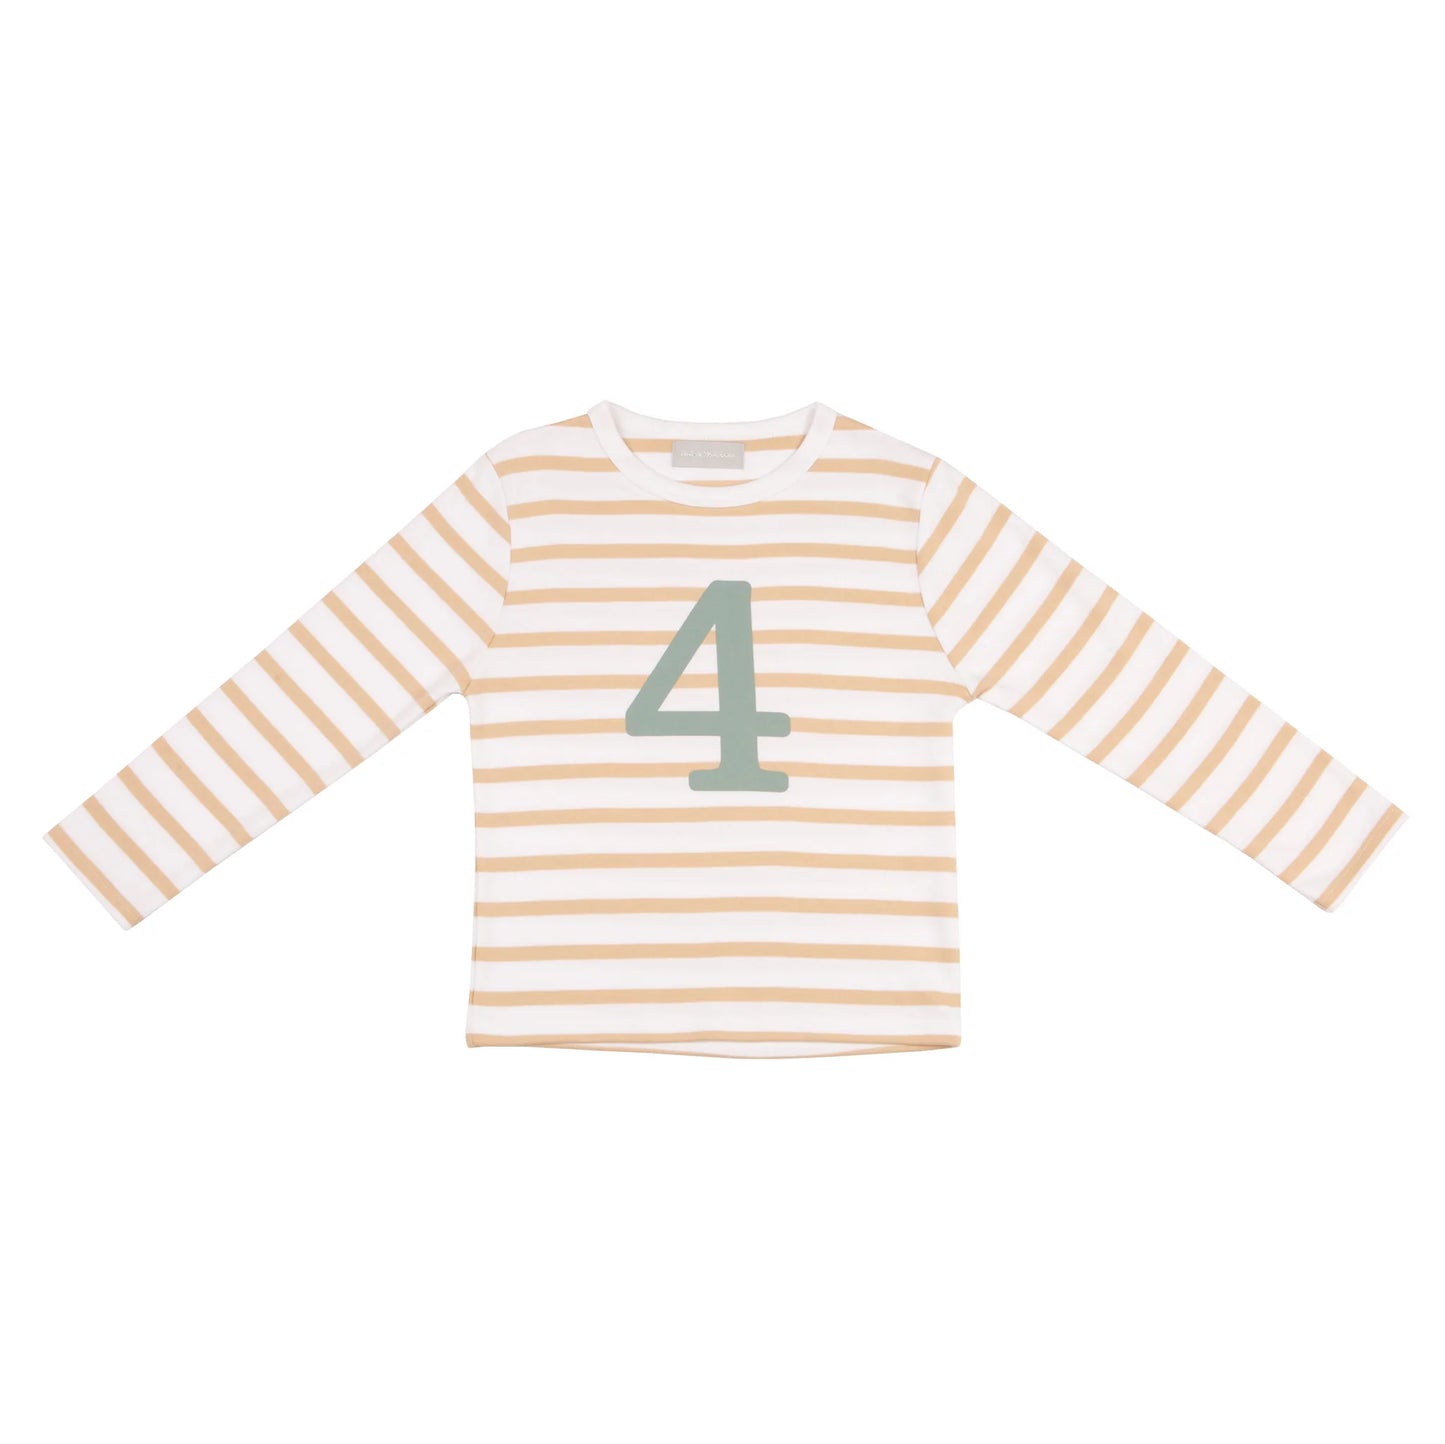 Age 4 Biscuit and White Breton Striped Number T Shirt